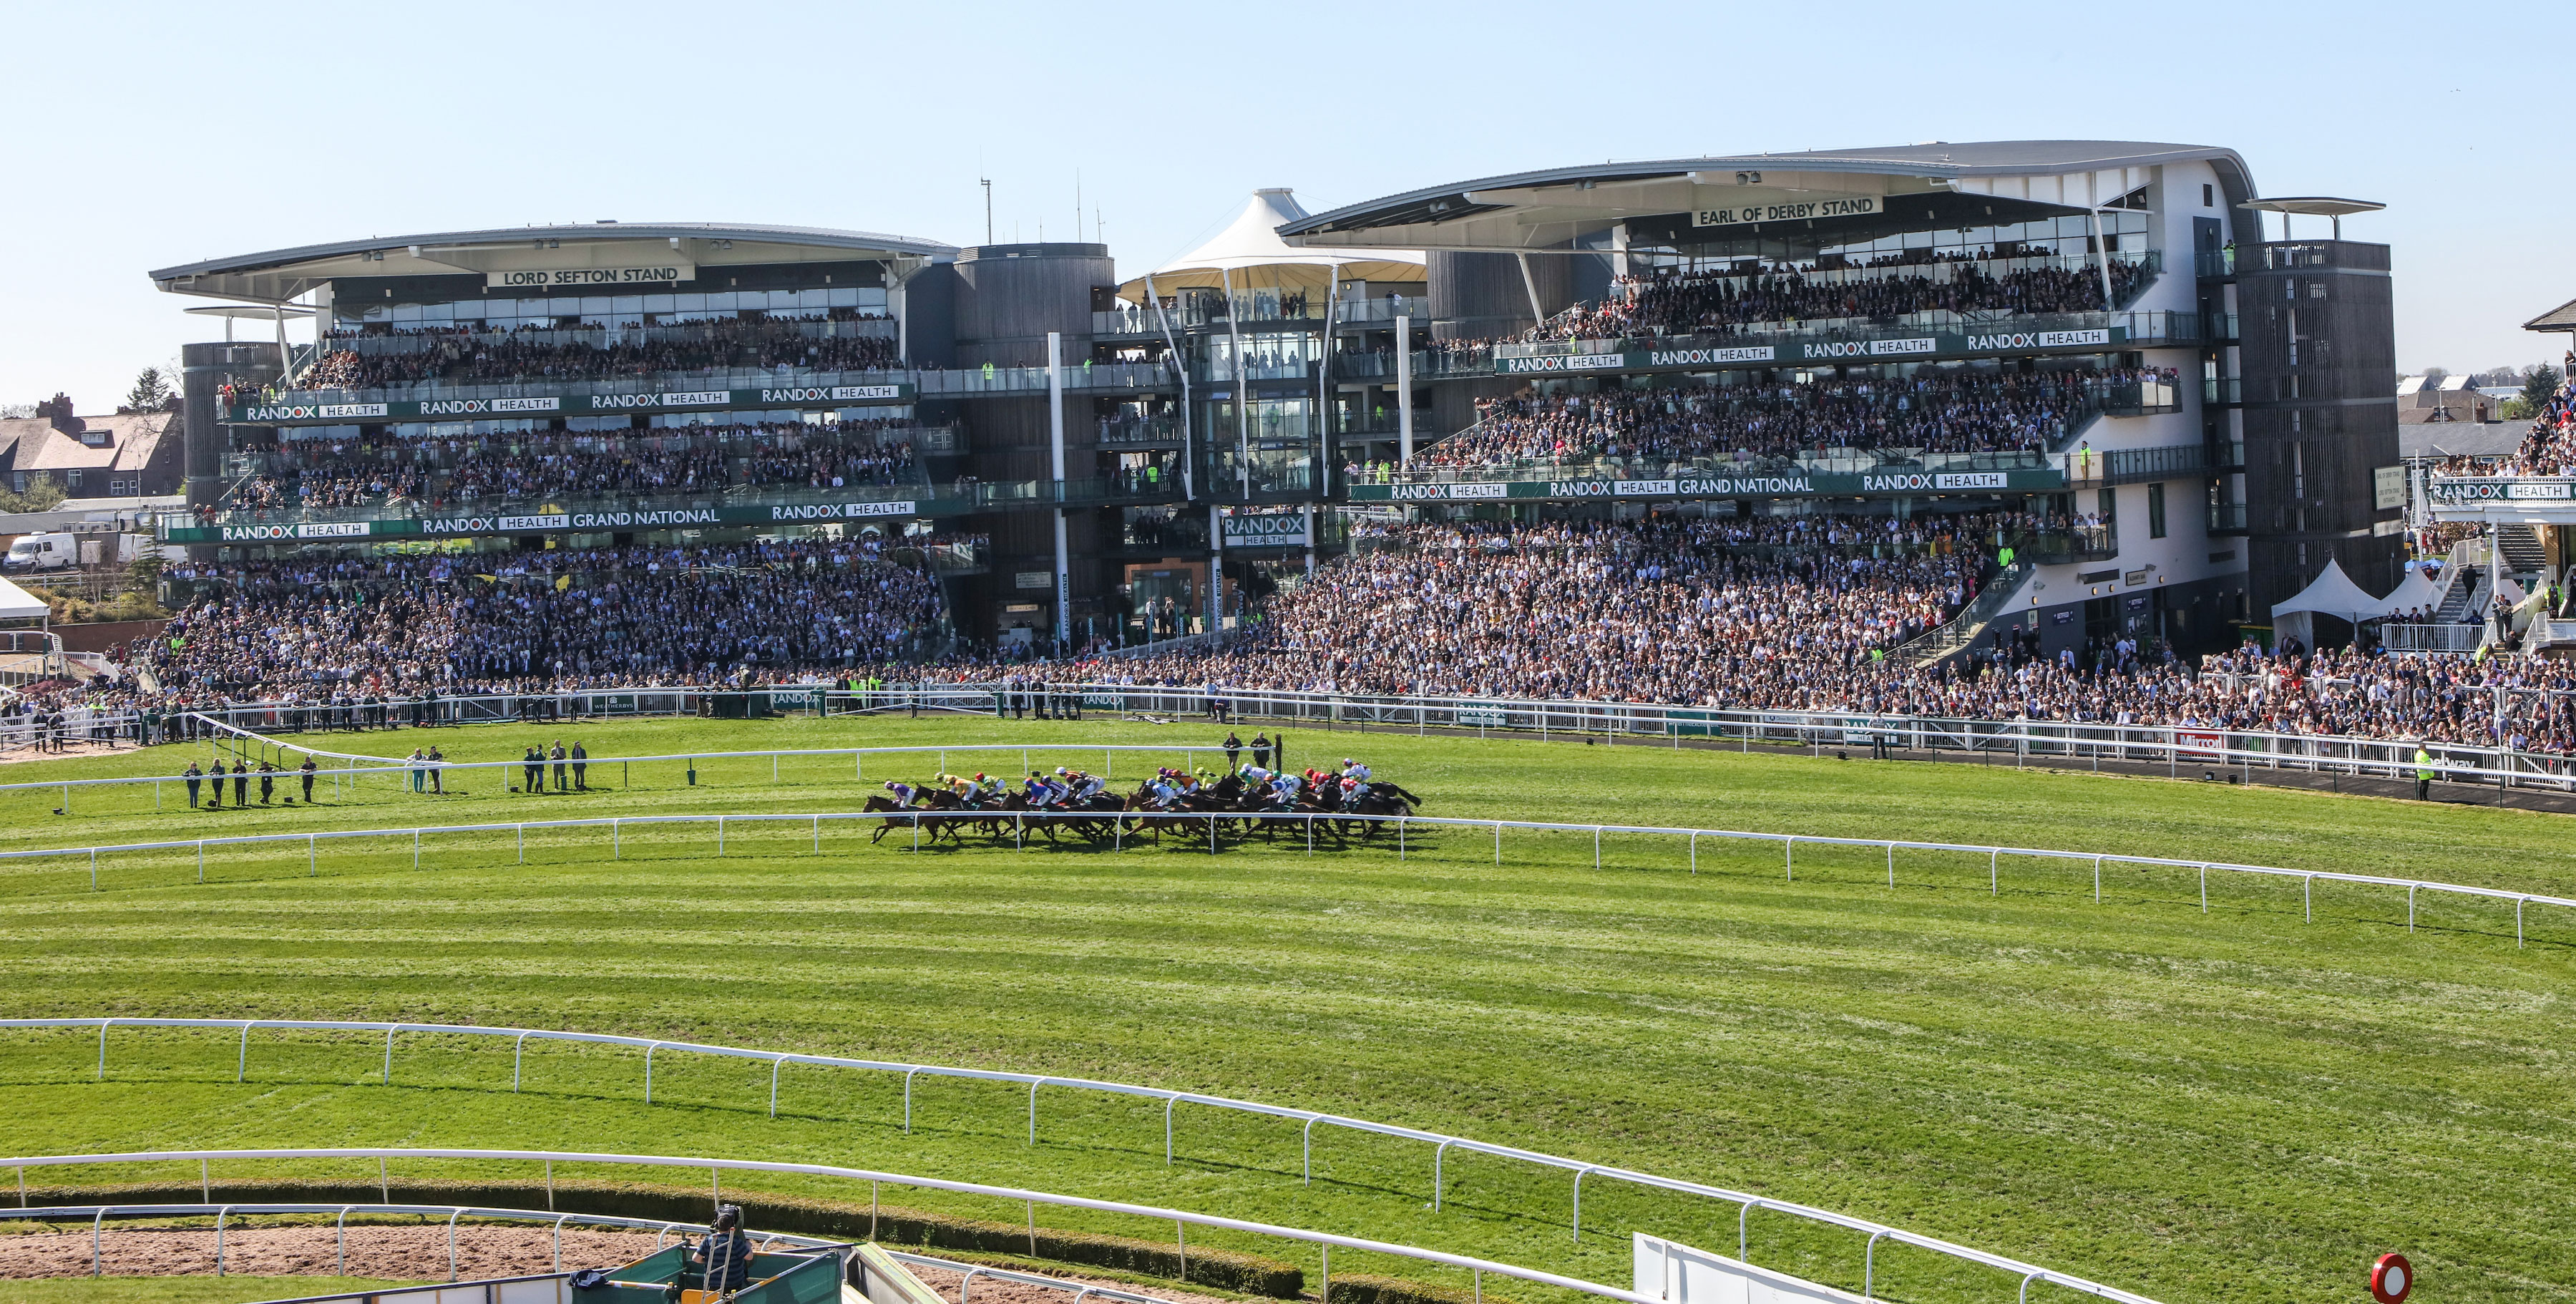 The packed stands on race day at Aintree with a tightly bunched group of horses galloping down the track in the foreground.